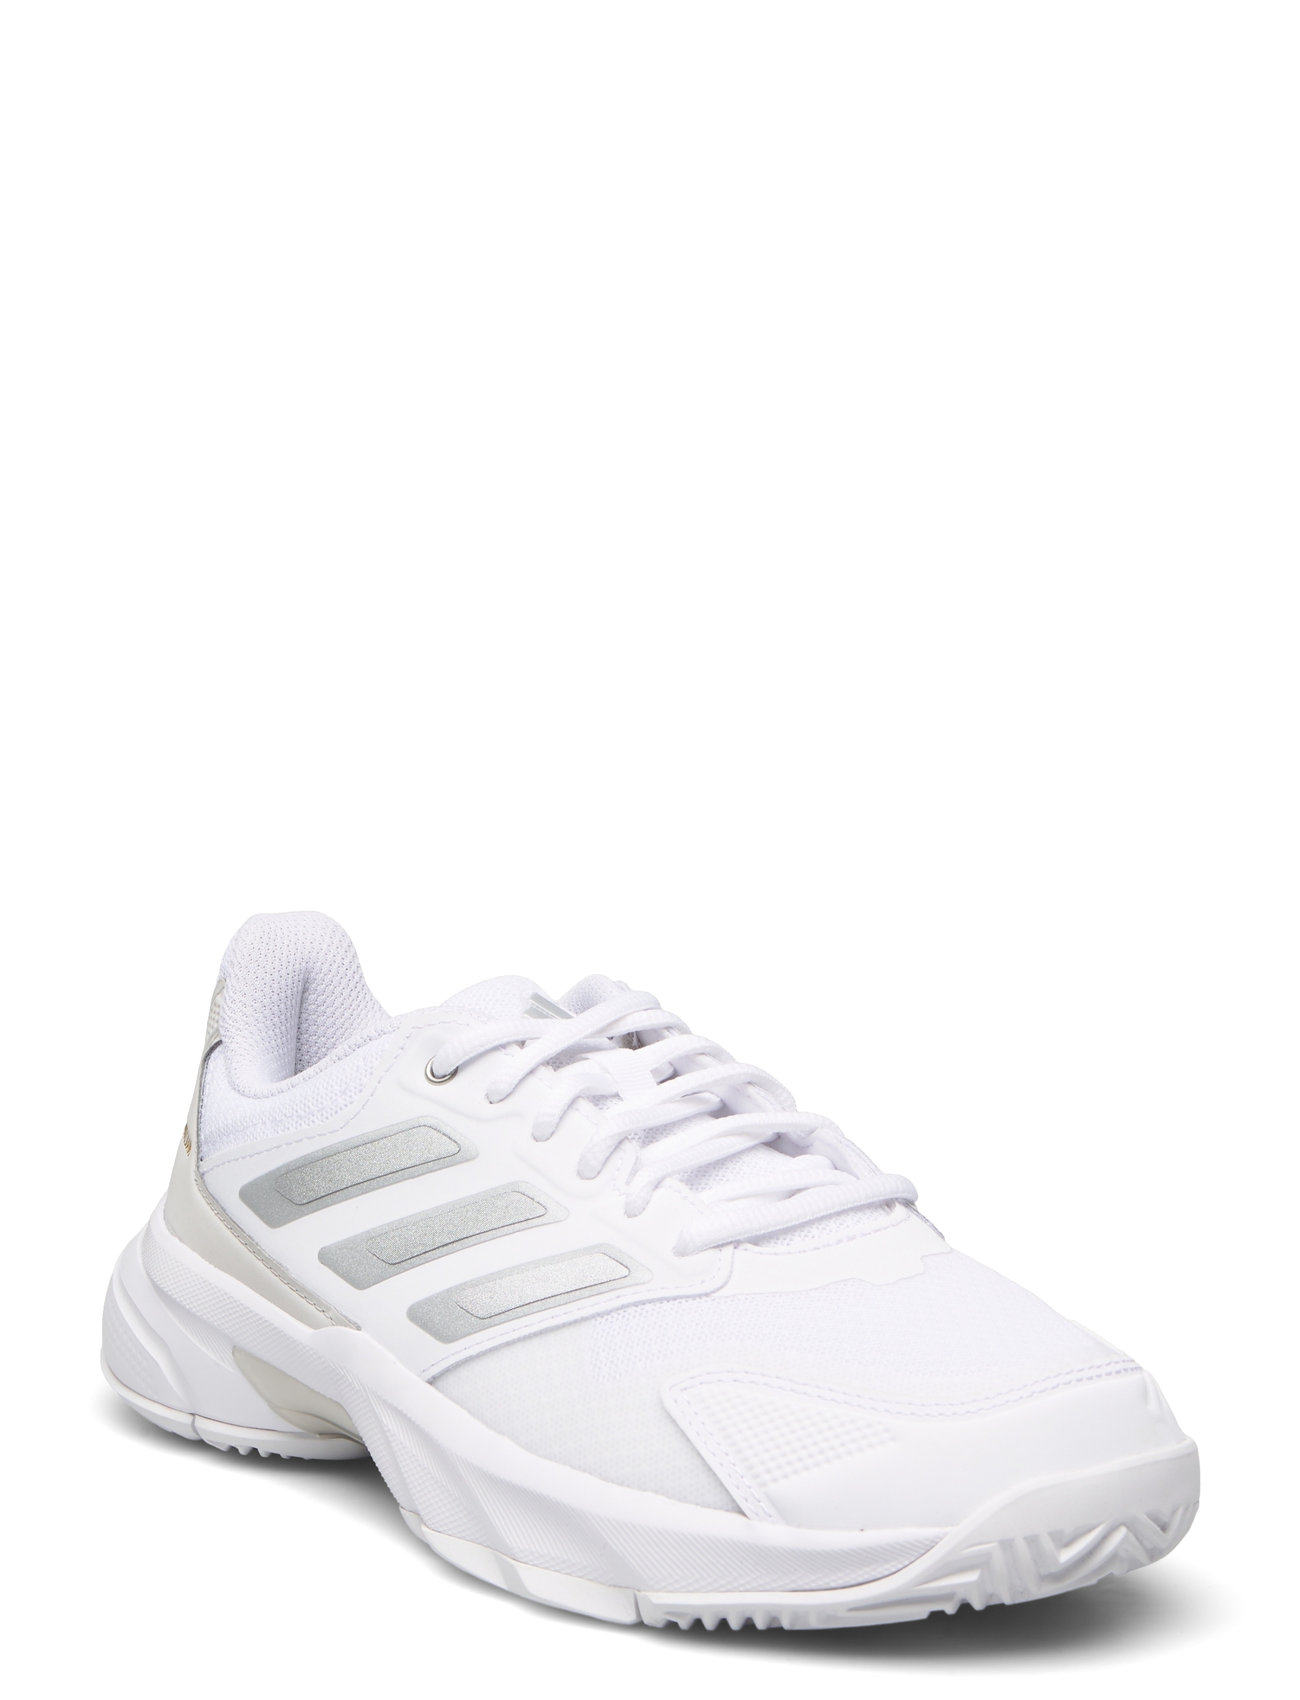 Courtjam Control 3 W Sport Sport Shoes Racketsports Shoes Tennis Shoes White Adidas Performance